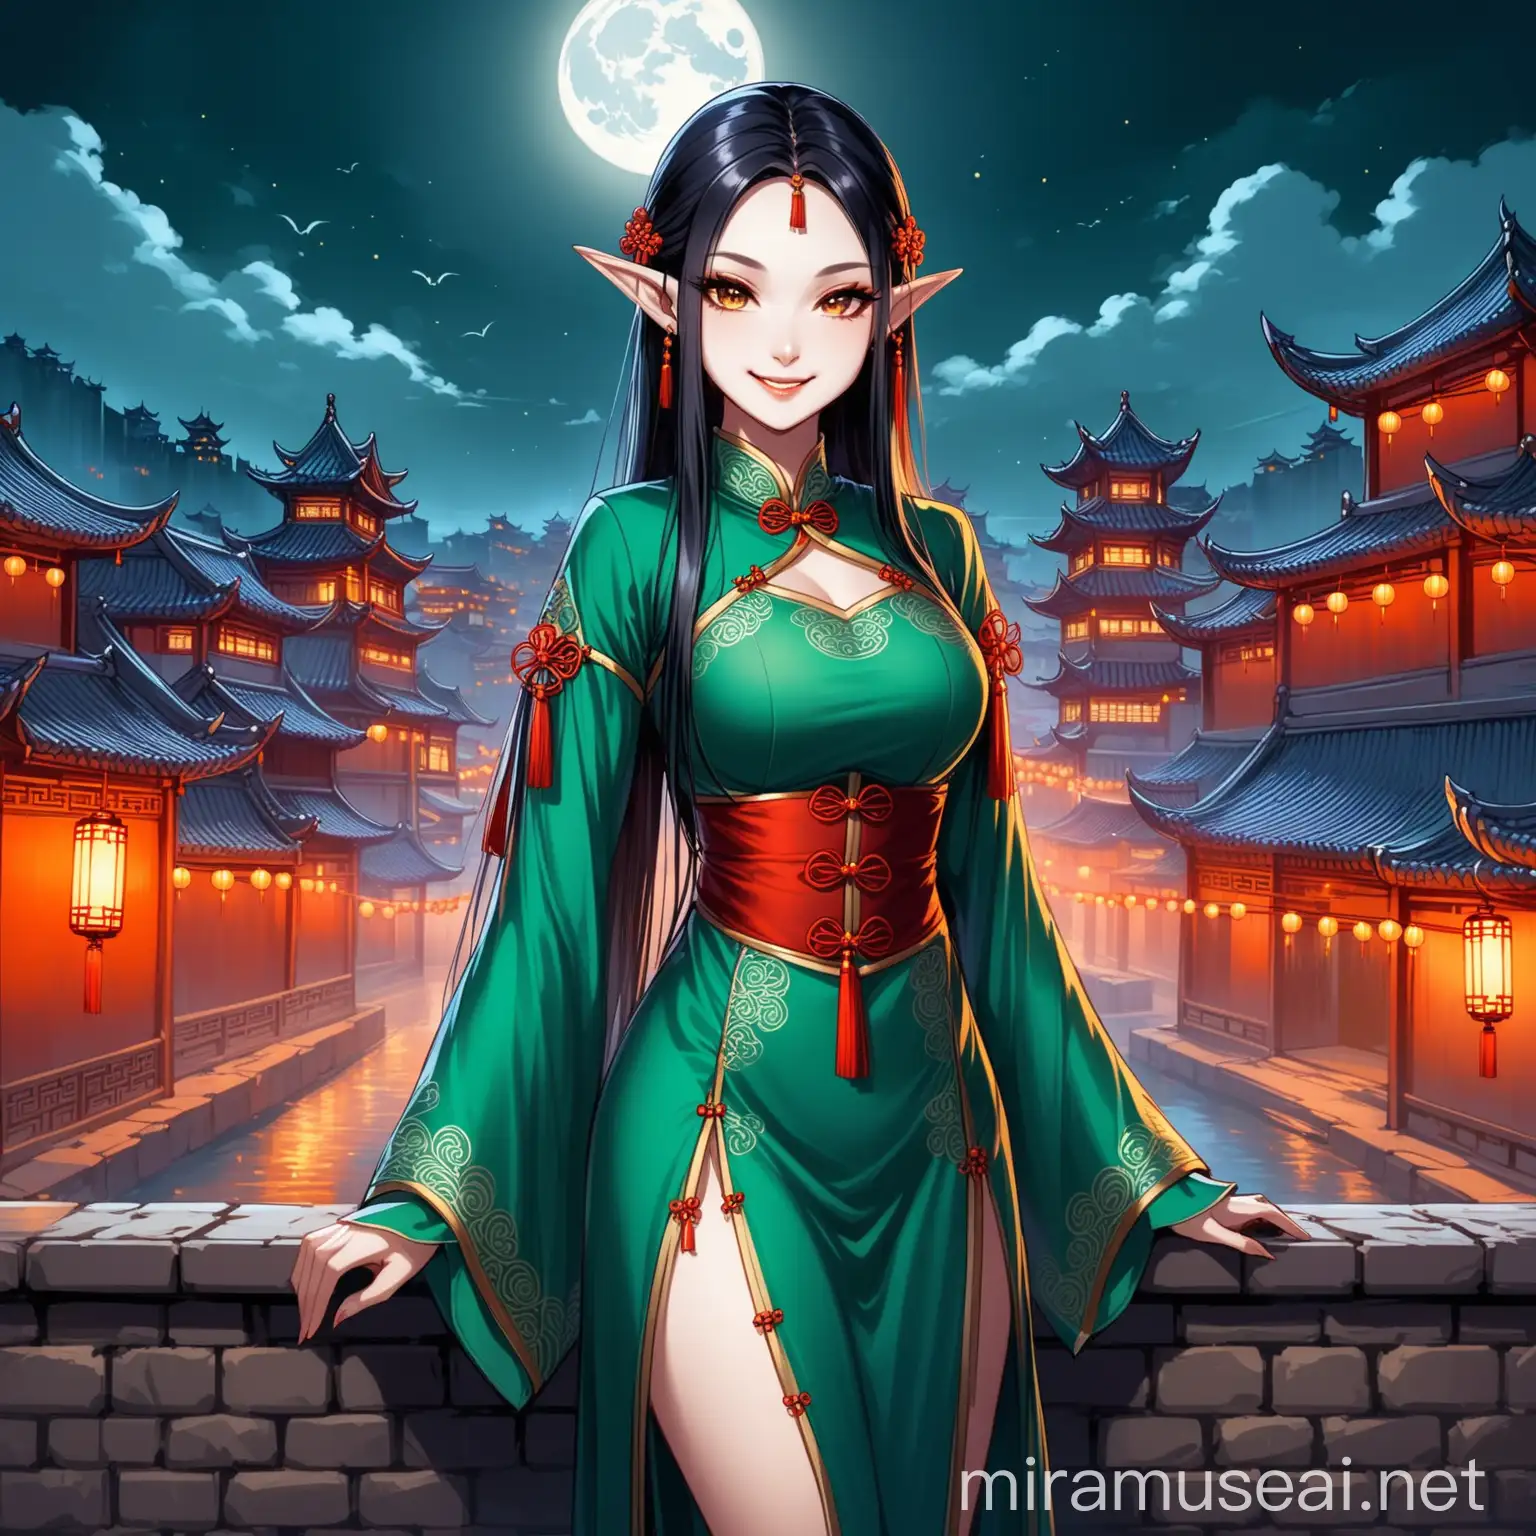 Noble Elf Female Smiling Evilly under Full Moon in Medieval Chinese City